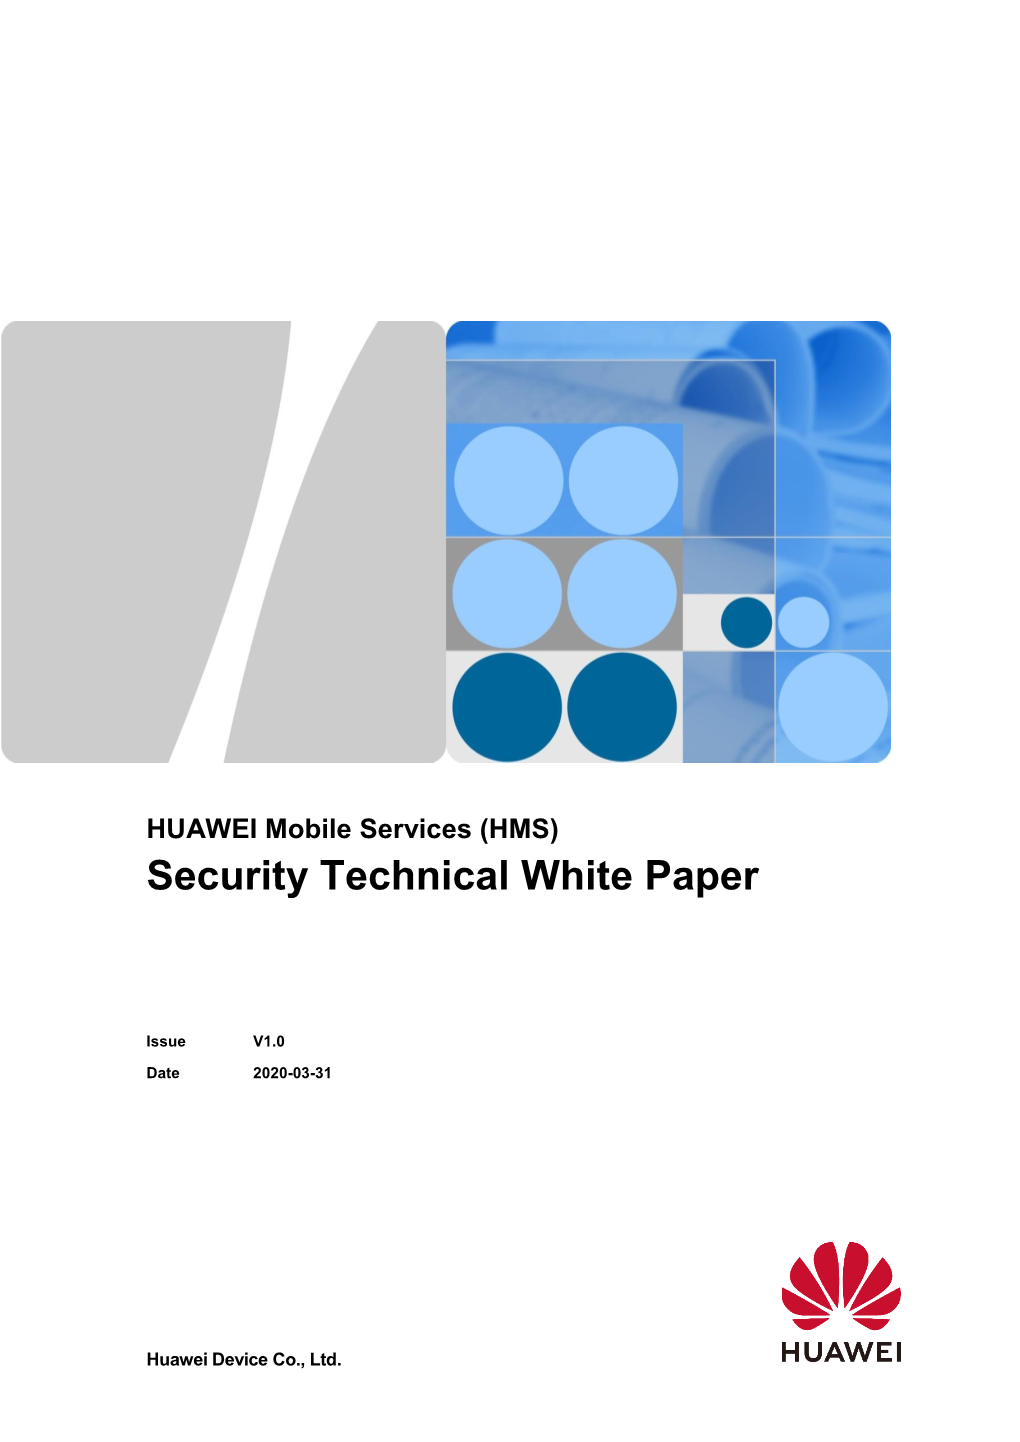 HUAWEI Mobile Services (HMS) Security Technical White Paper